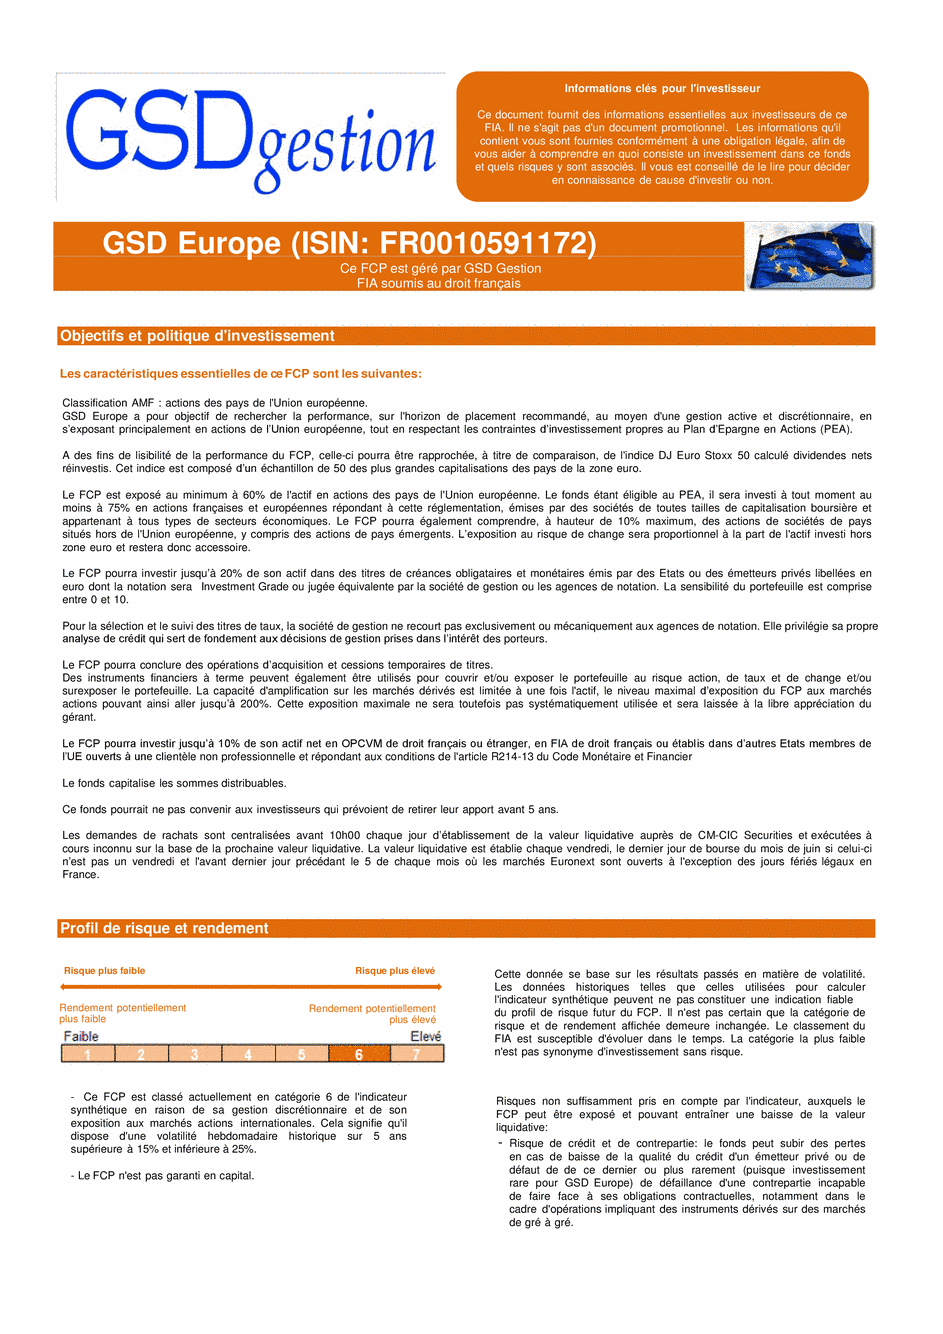 DICI-Prospectus Complet GSD Europe - 03/09/2015 - French